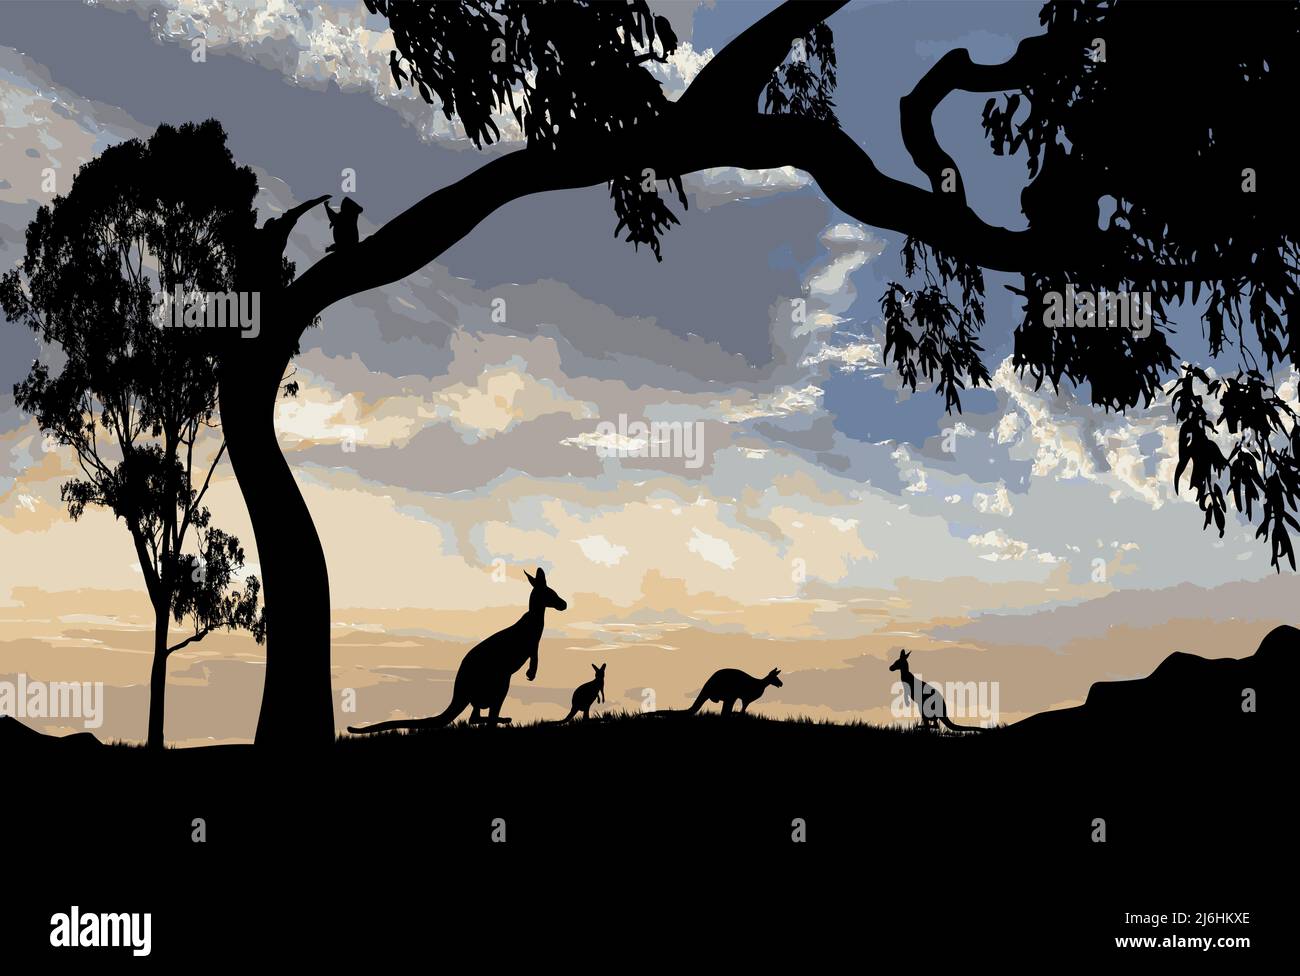 silhouette of kangaroos with a large gum tree and a koala sitting in the tree Stock Vector